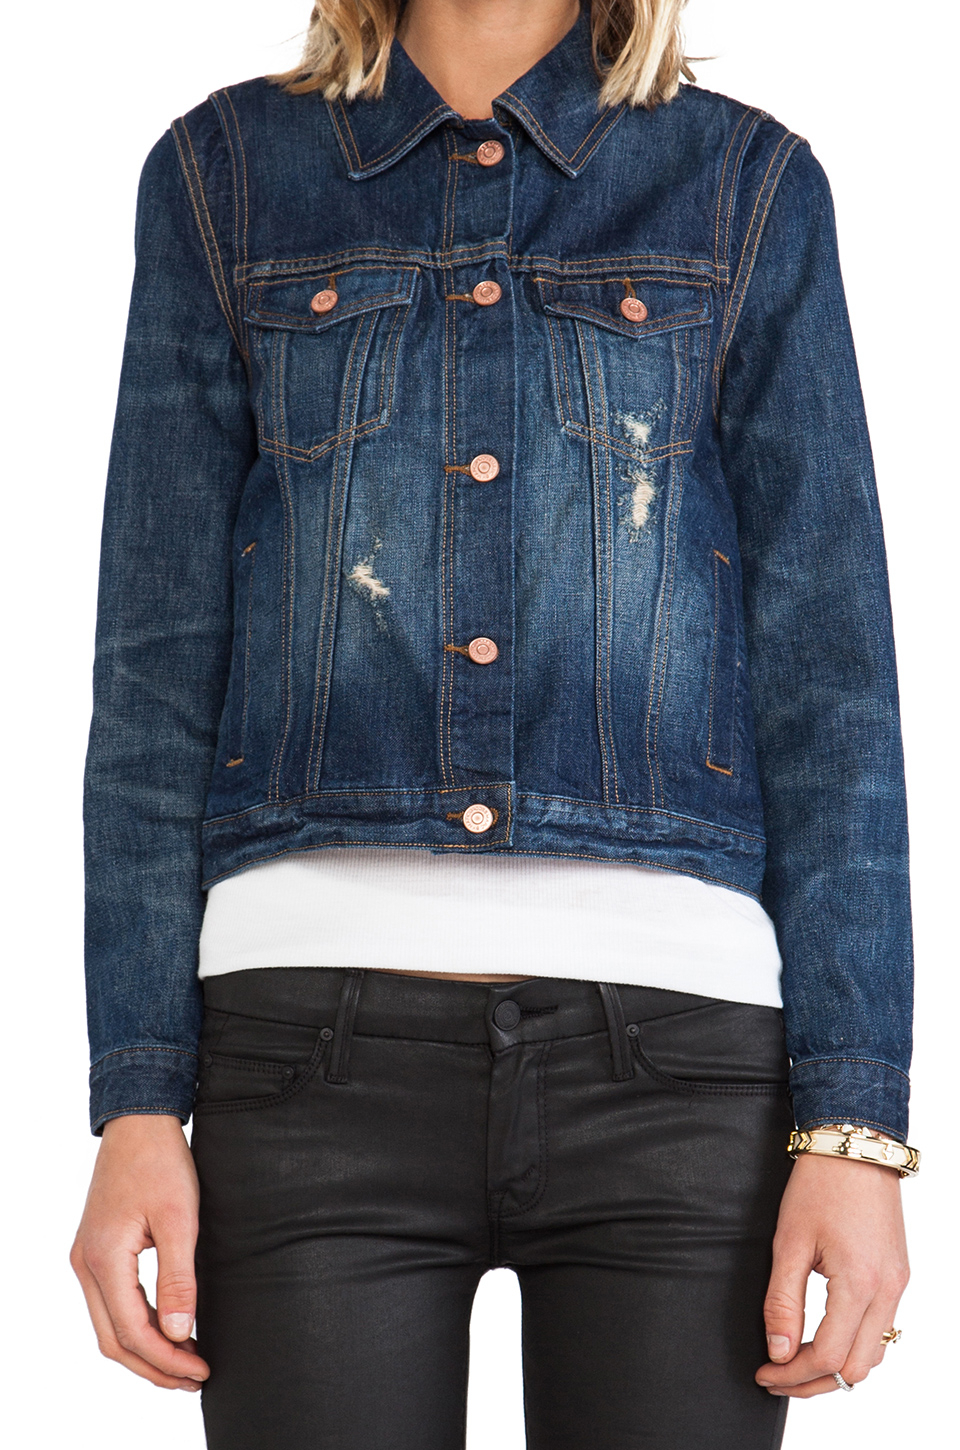 Lyst - Marc By Marc Jacobs Pieced Denim Jacket in Blue